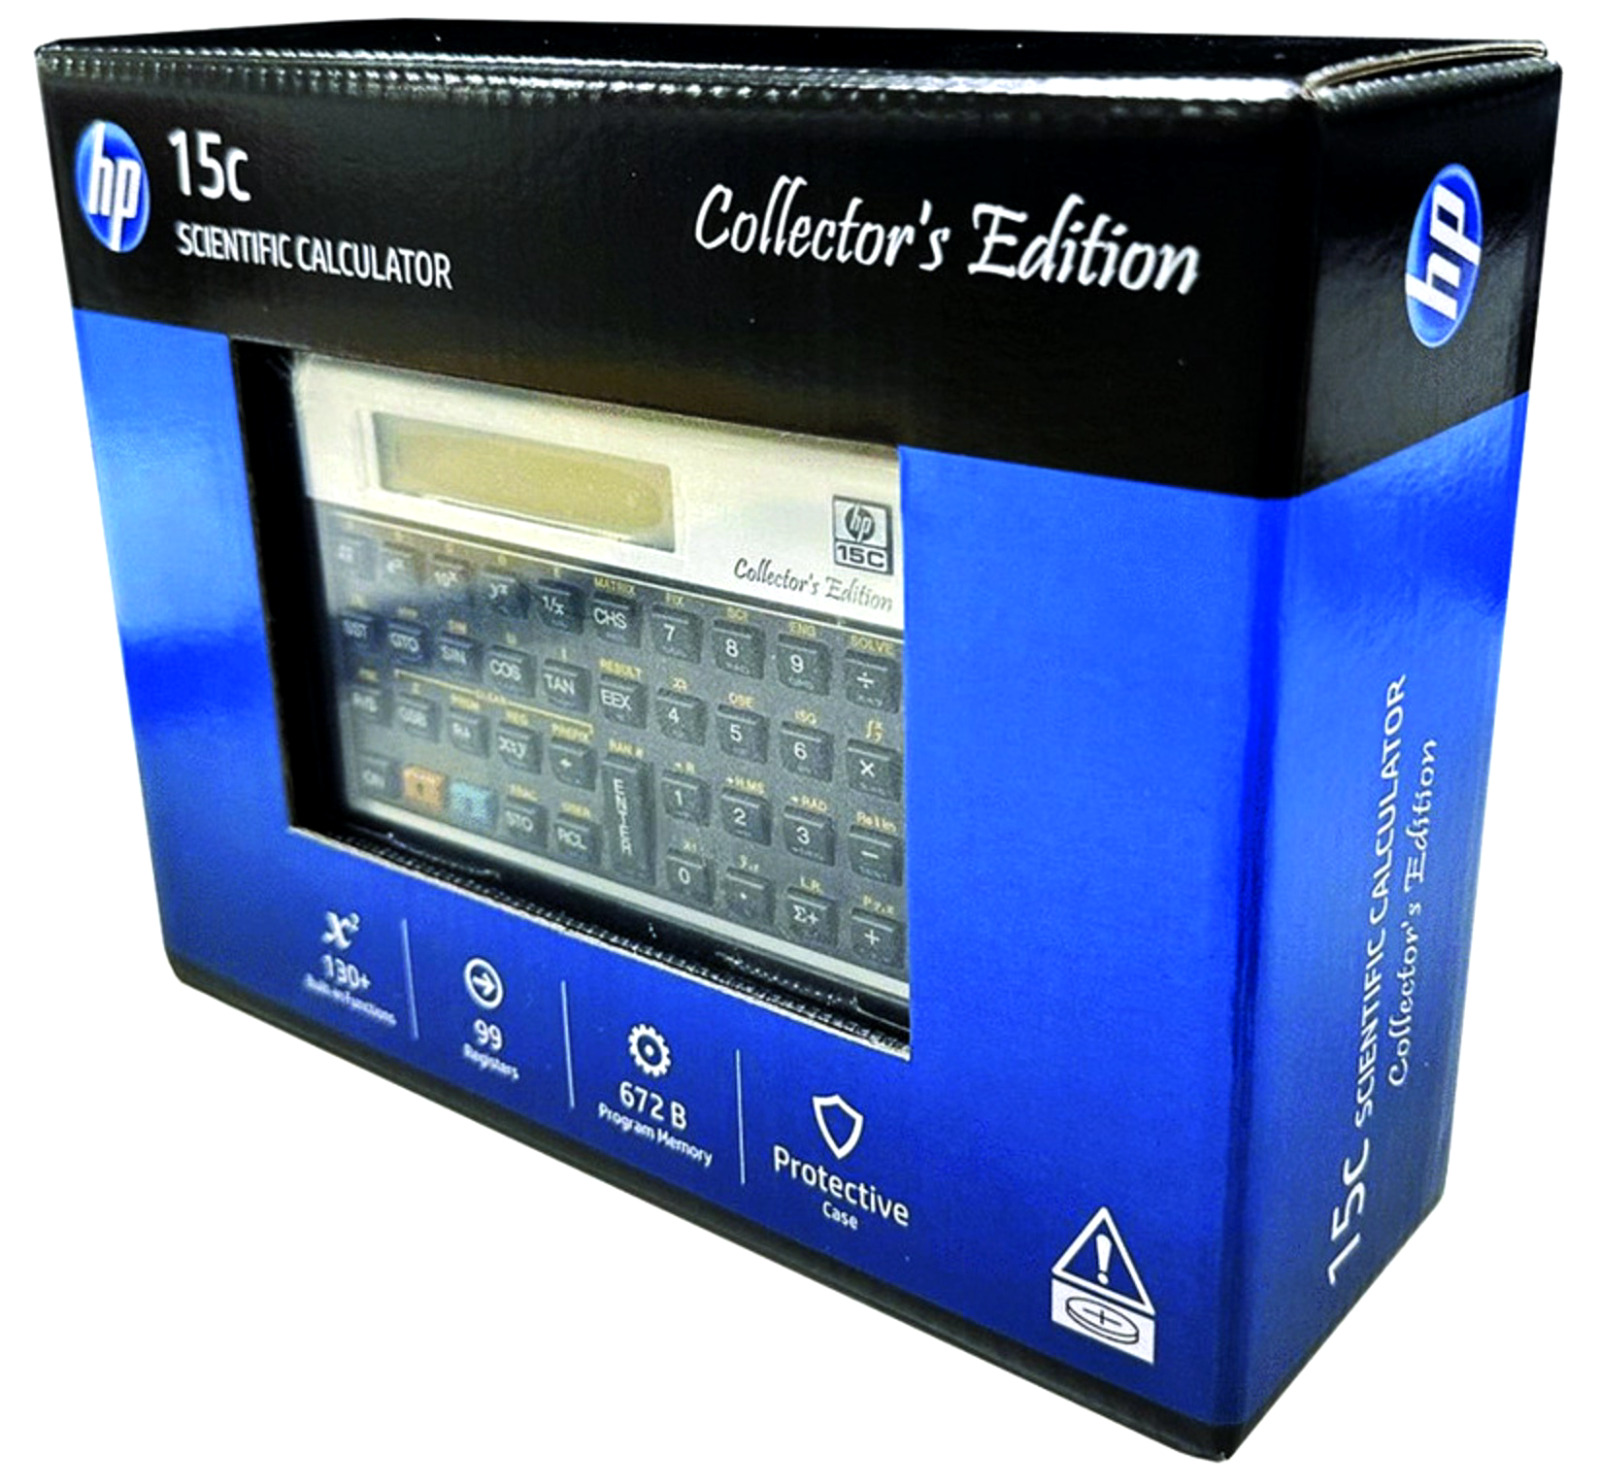 *NEW* HP 15C RPN Collector’s Edition Scientific Calculator - Limited Production